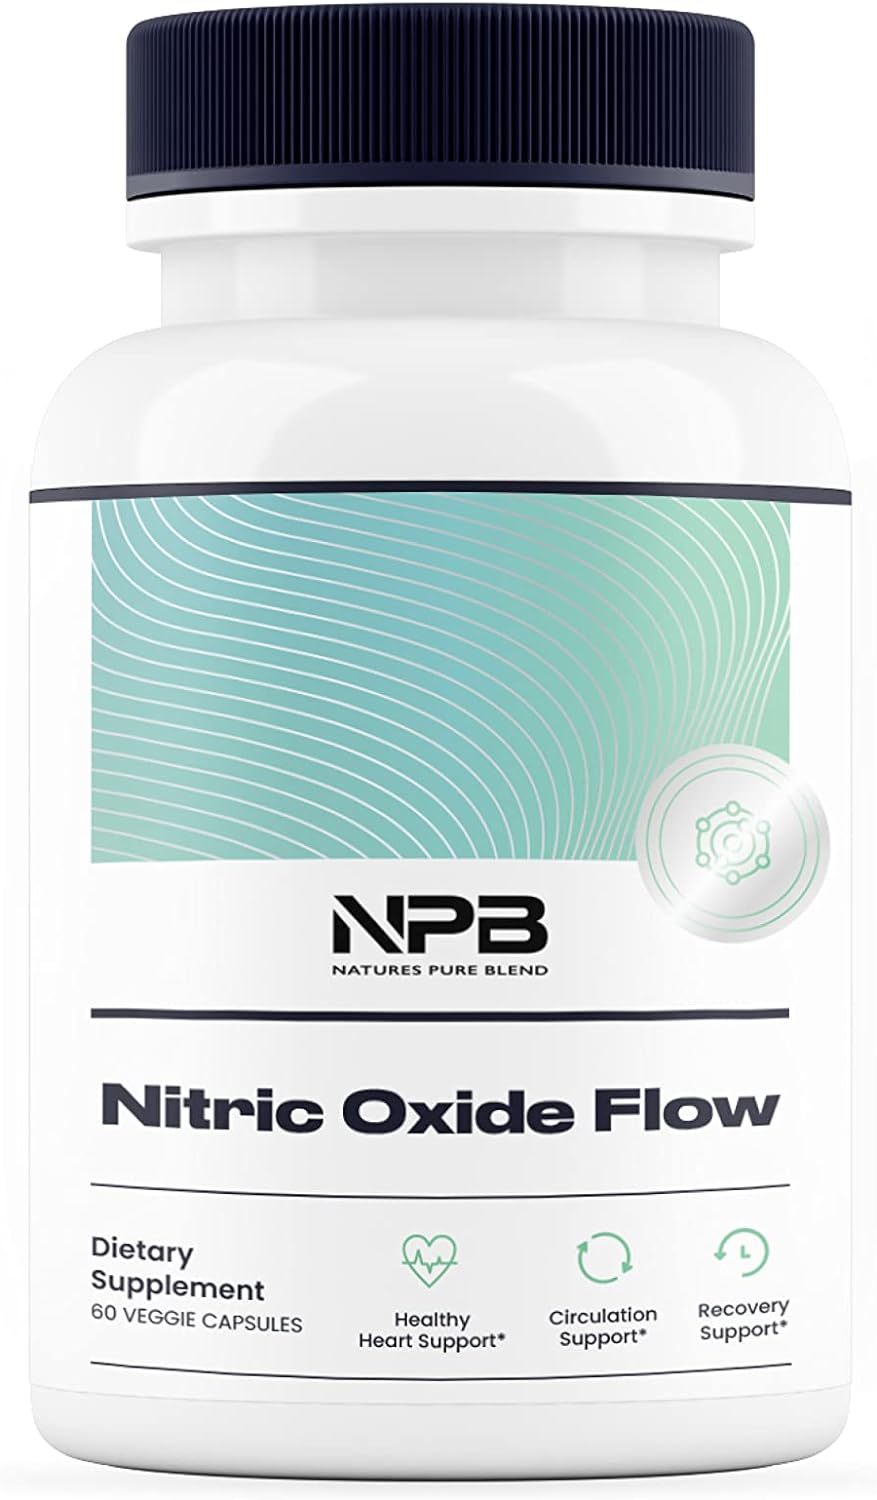 Nature's Pure Blend Nitric Oxide Supplement L-Arginine - Blood Pressure Support Capsule - 1500MG - Nitric Oxide Booster - Amino Energy - Preworkout for Men, Muscle Growth